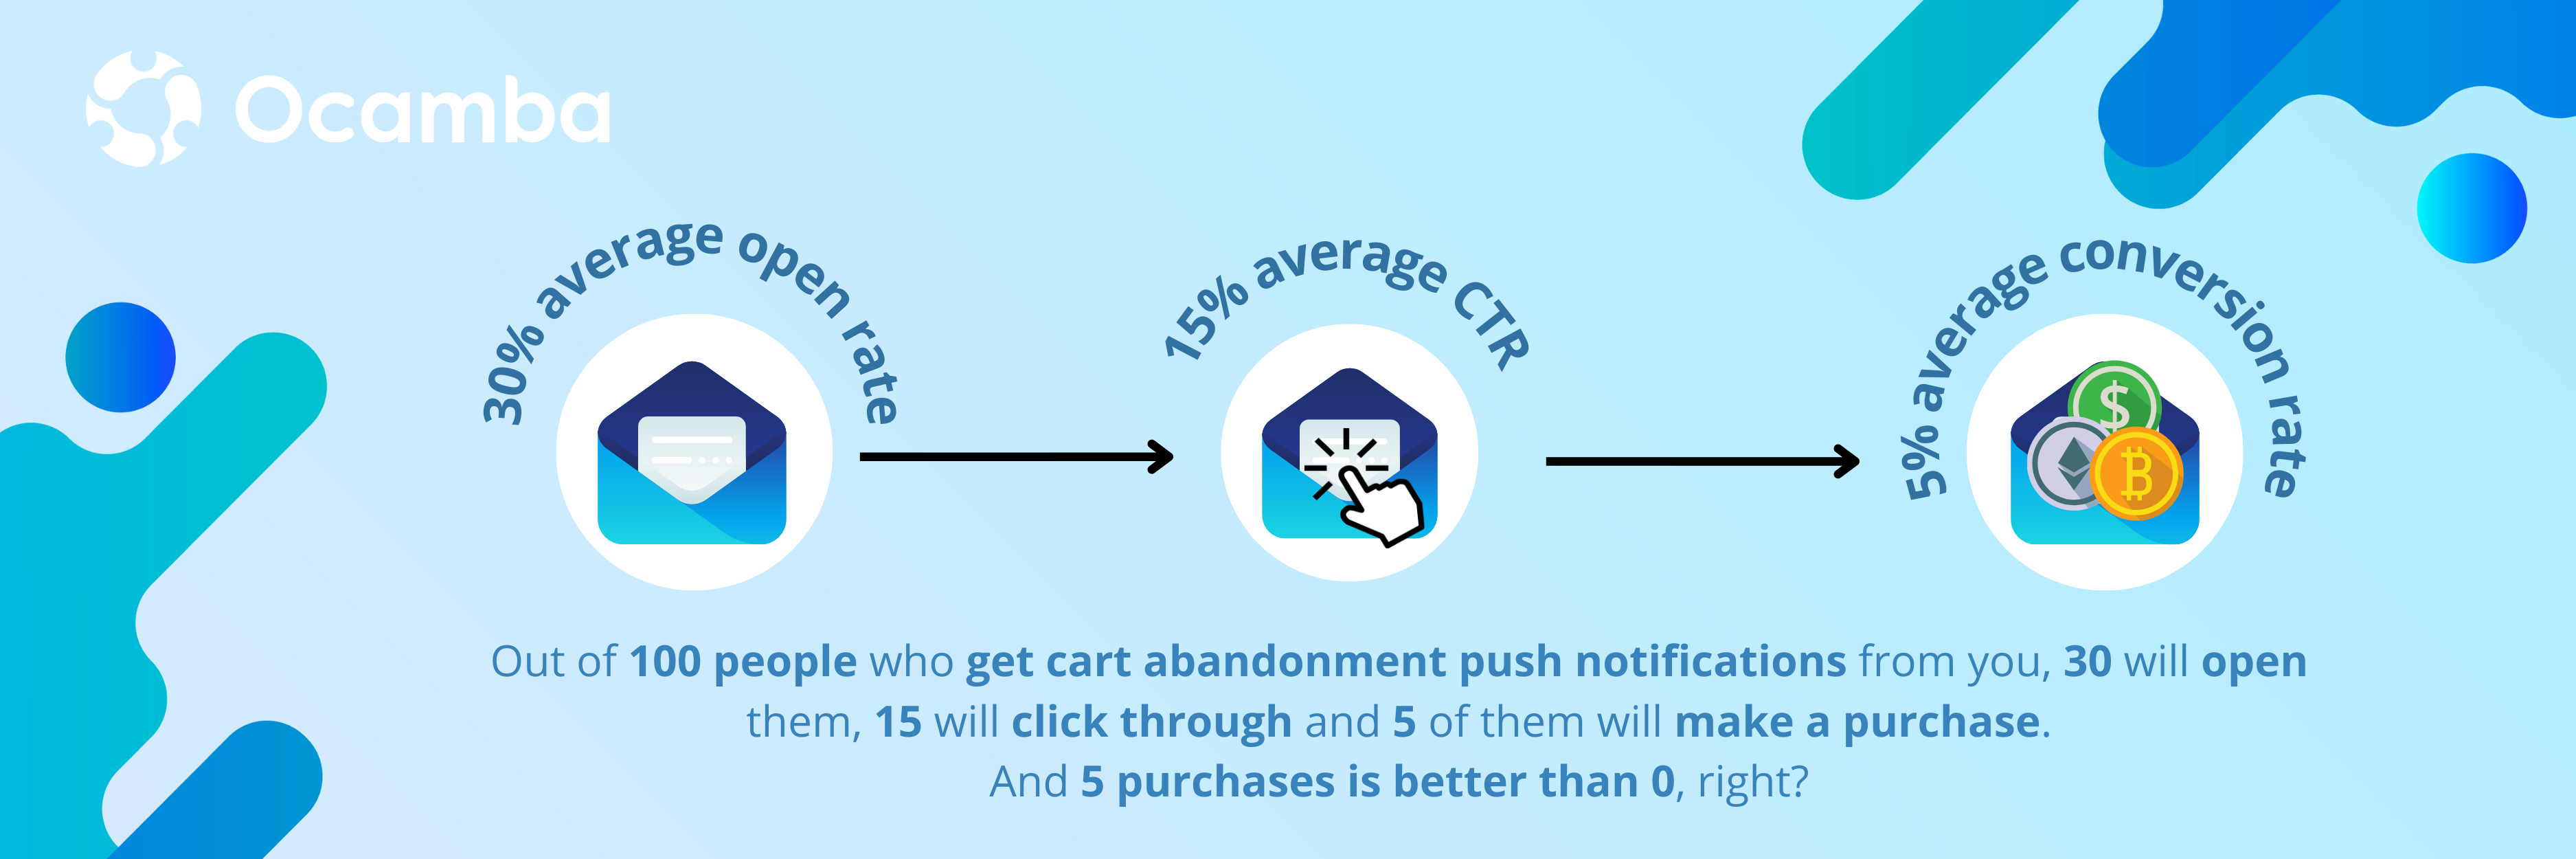 Ecommerce push notifications templates and statistics for abandoned cart alerts